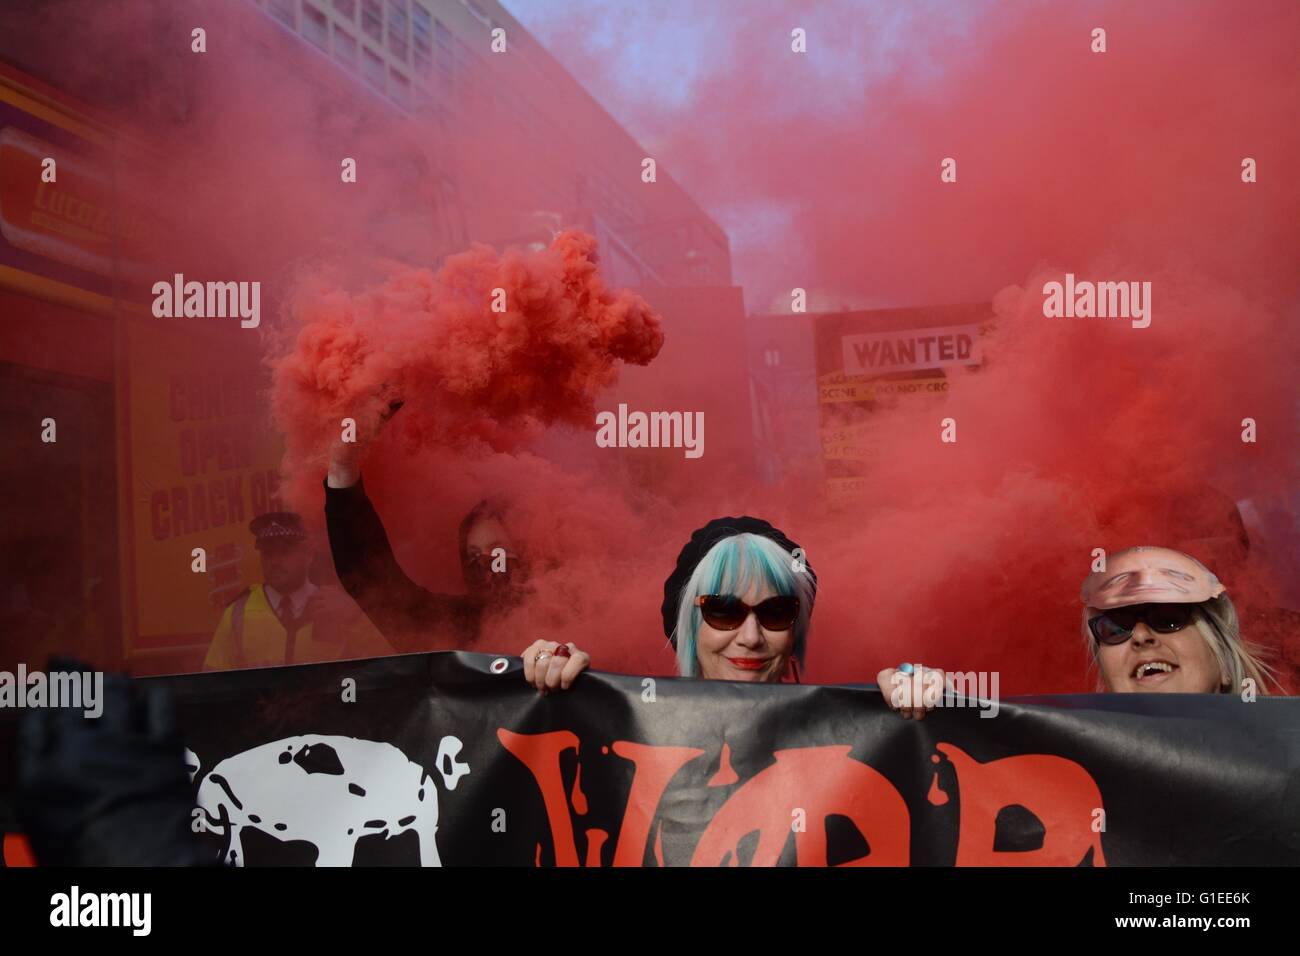 London, UK. 14th May 2016. Classwar protesters march down Oxford Street as smoke grenades are let off. Credit: Marc Ward/Alamy Live News Stock Photo